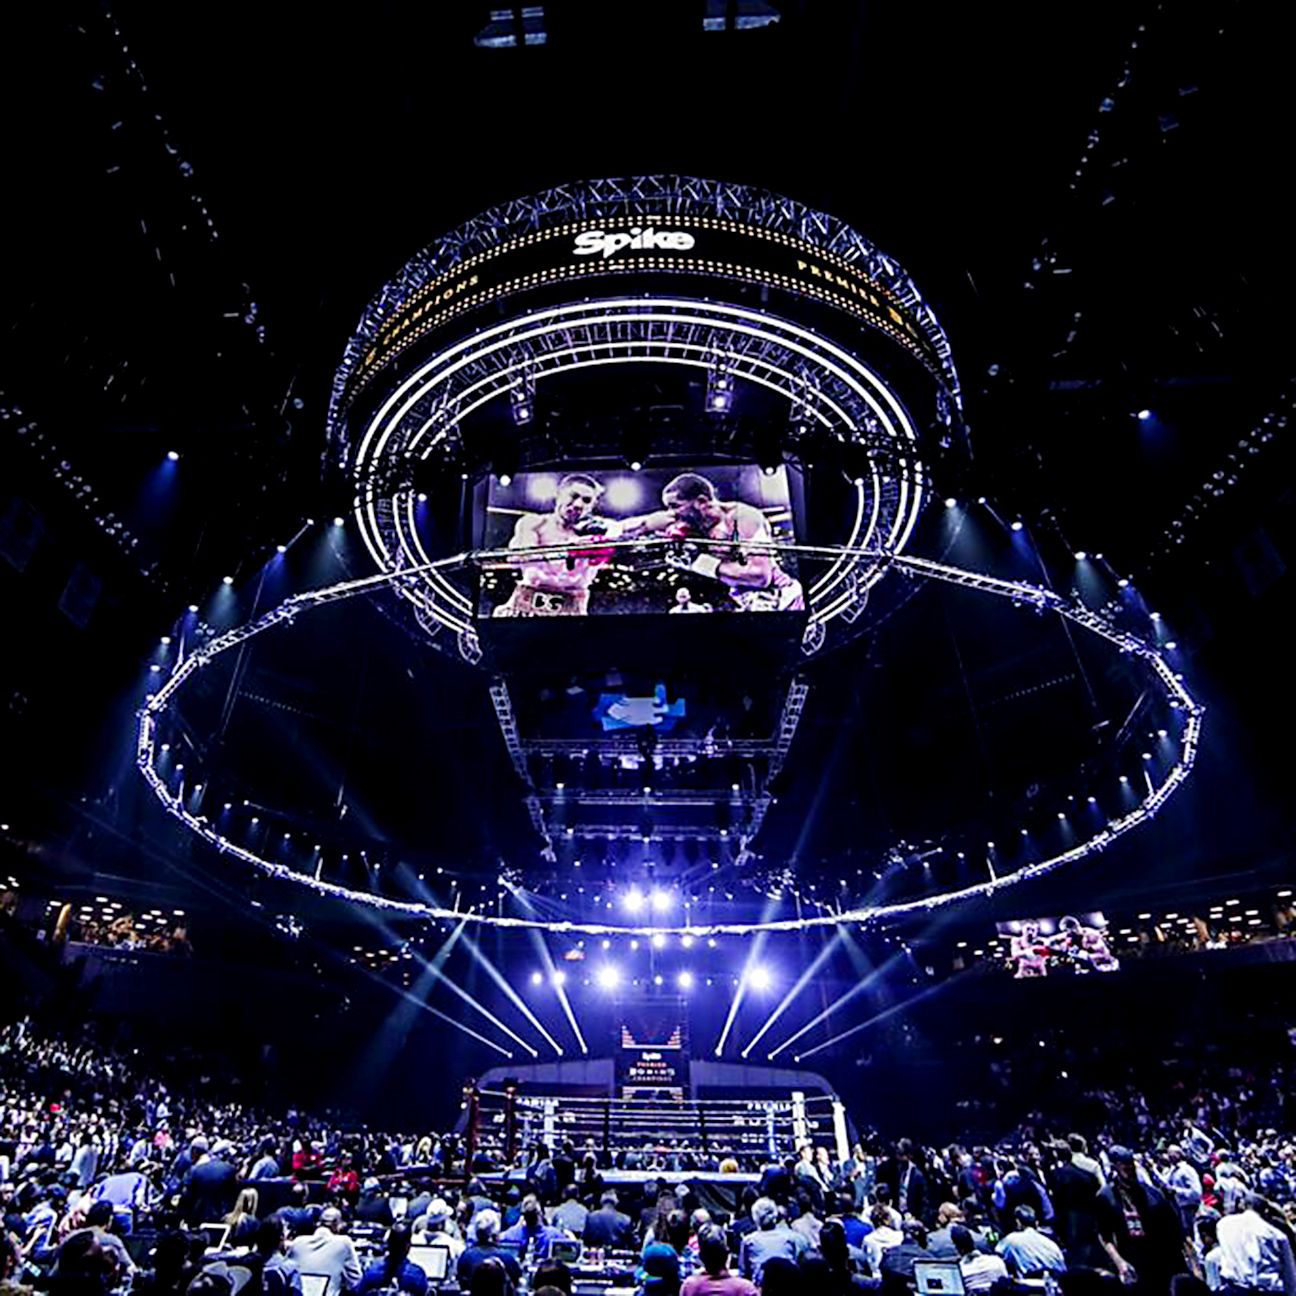 Big time boxing a priority at Barclays Center